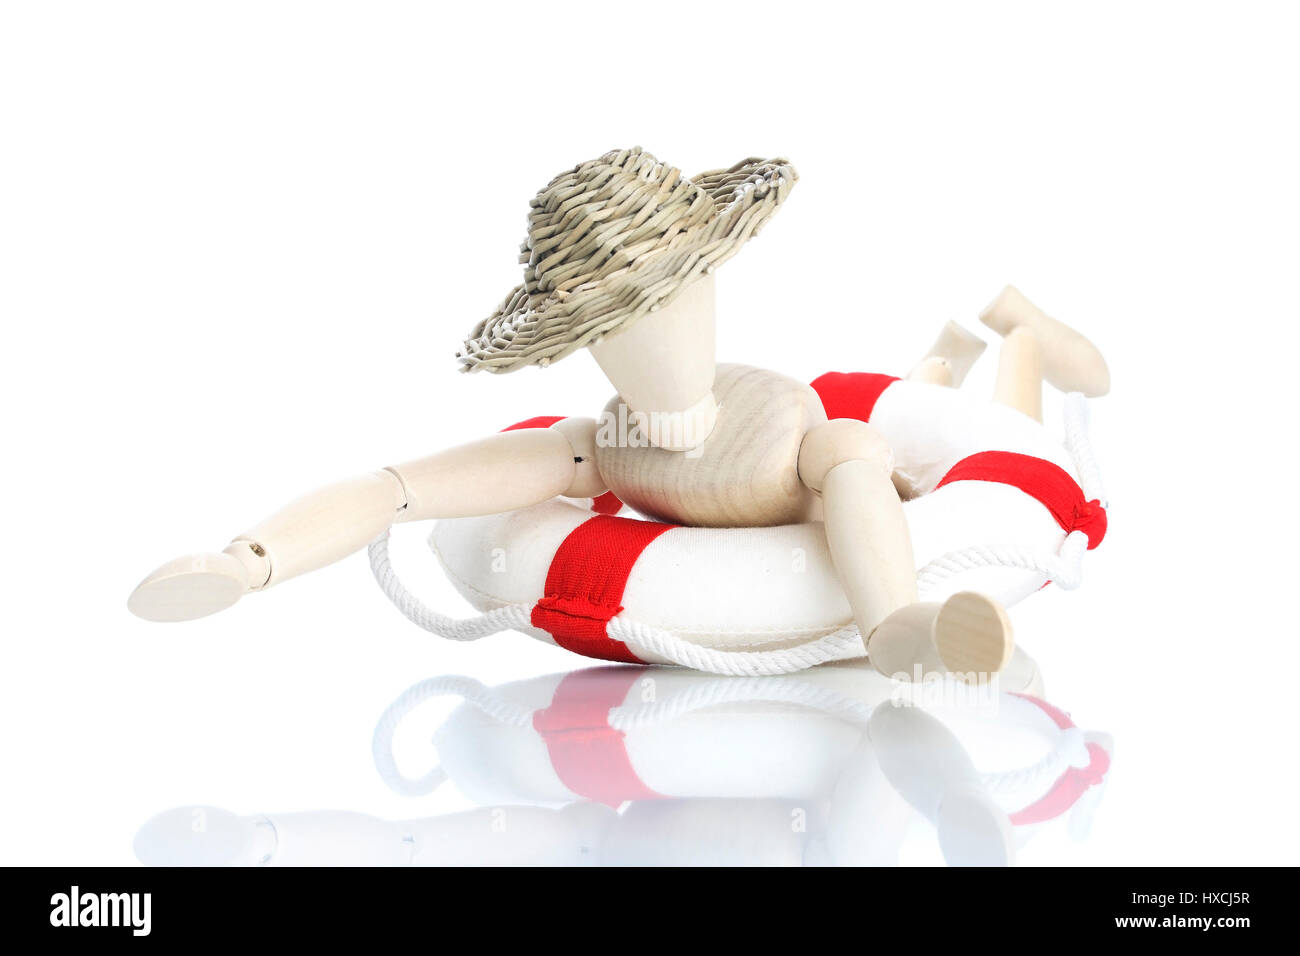 Wooden doll with life preserver, Holzpuppe mit Rettungsring Stock Photo